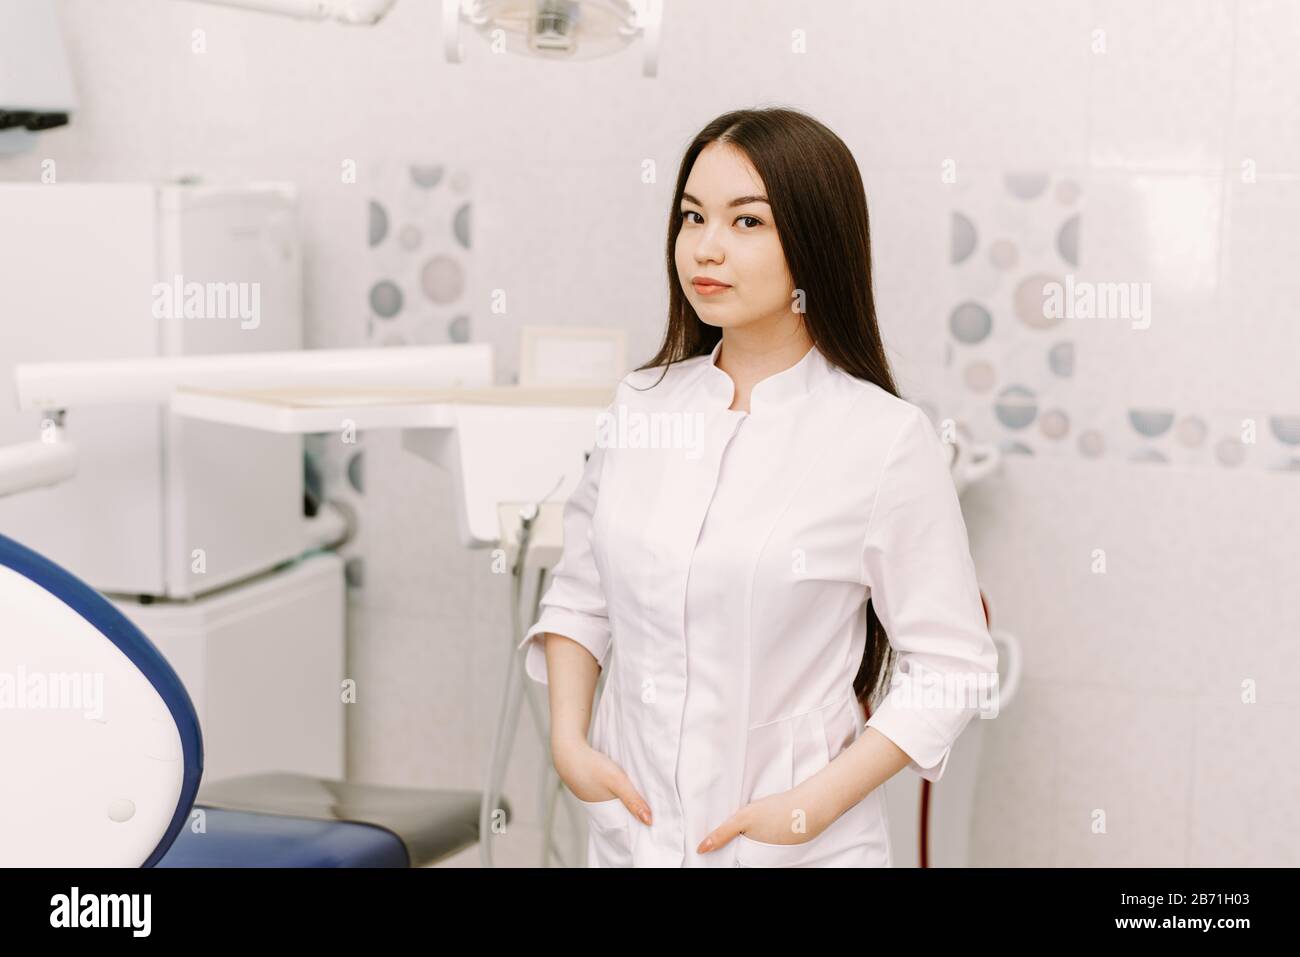 cheerful female dentist smiling in her office. dentistry student standing in a dental treatment room. Stock Photo